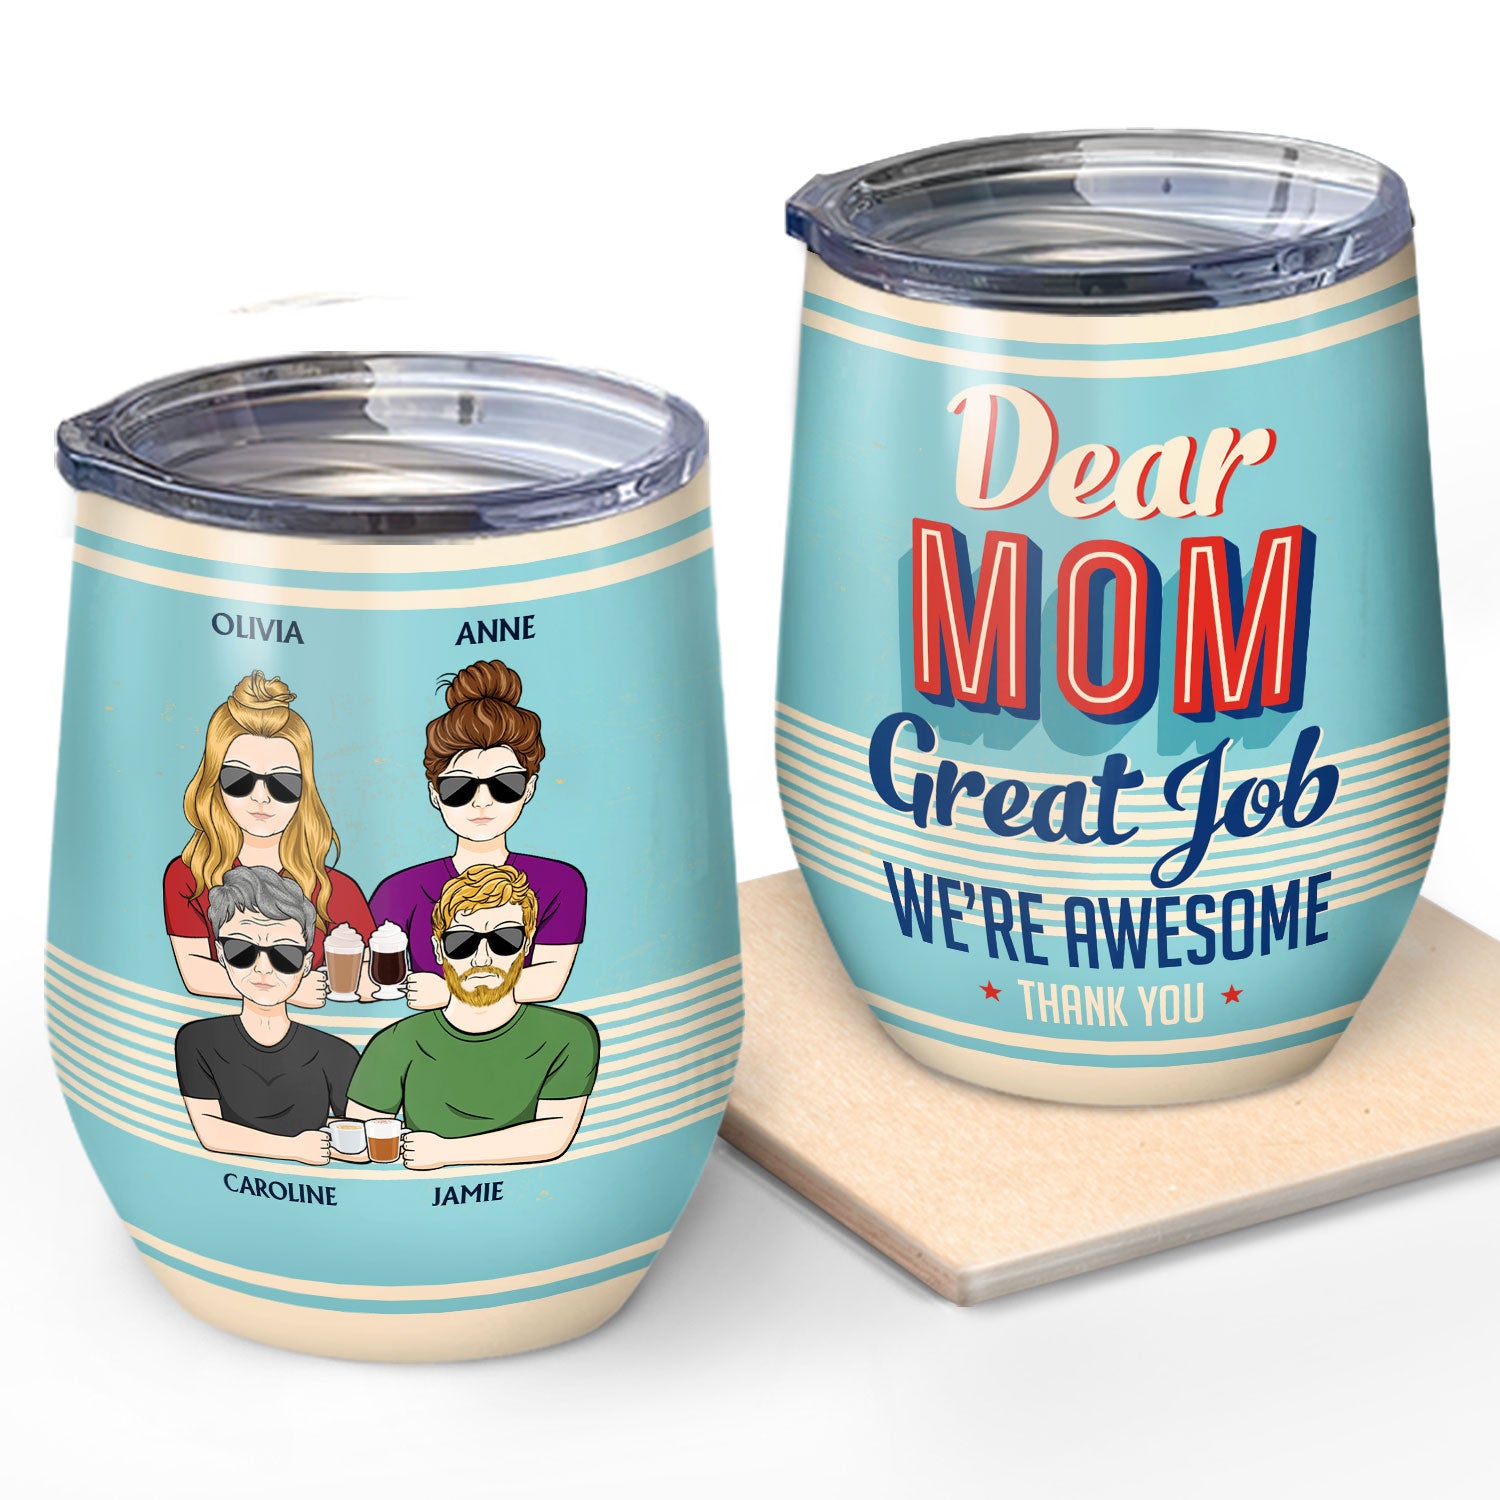 Dear Mom Great Job We‘re Awesome Thank You - Birthday, Loving Gift For Mother, Grandma, Grandmother - Personalized Custom Wine Tumbler